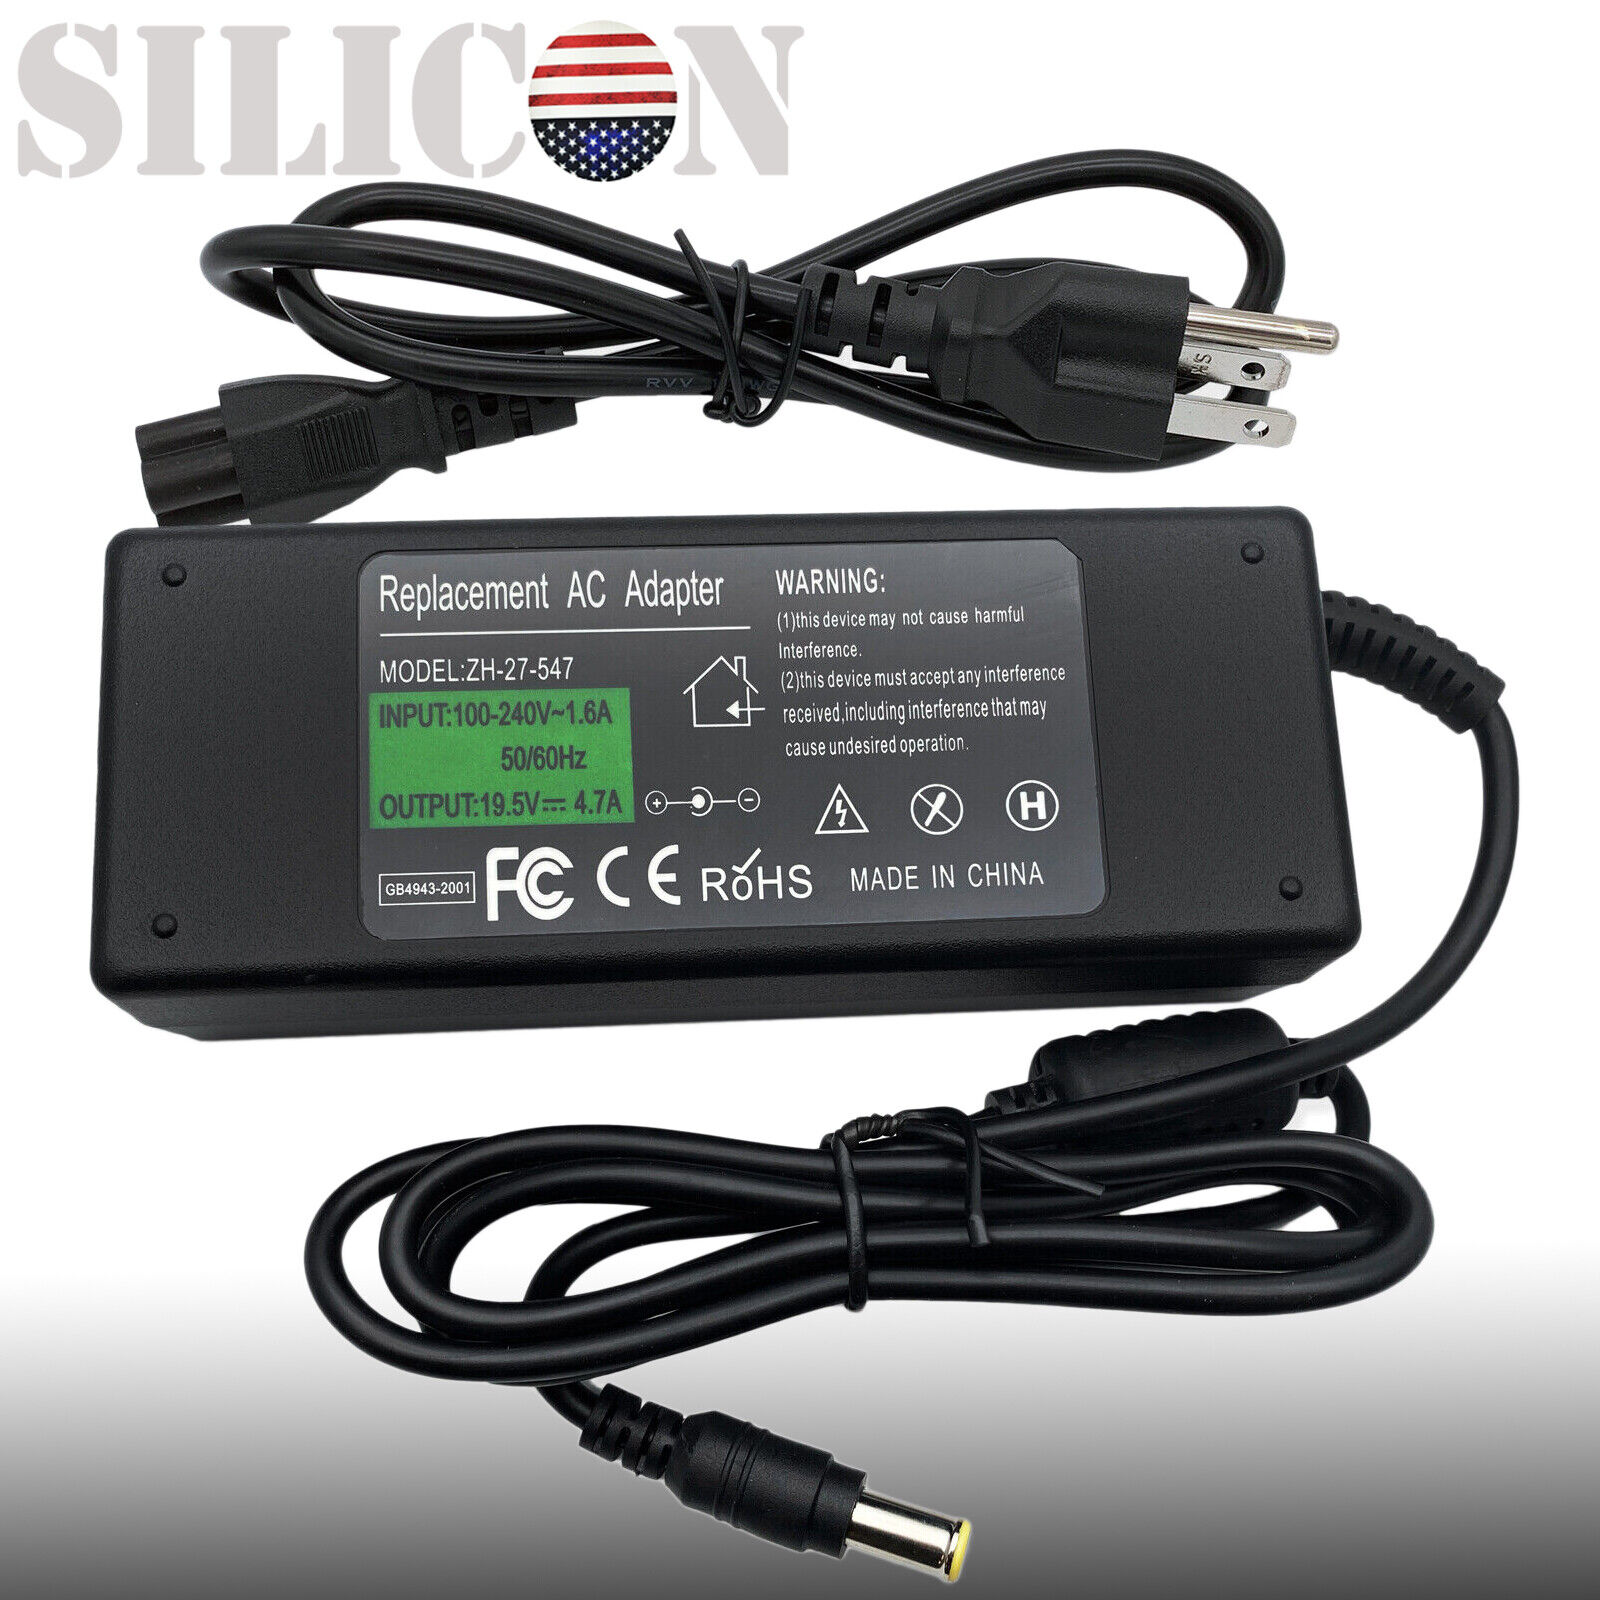 New AC Adapter Charger Power for Sony Vaio PCG-5K1L PCG-7133L PCG-7142L PCG-7Z2L